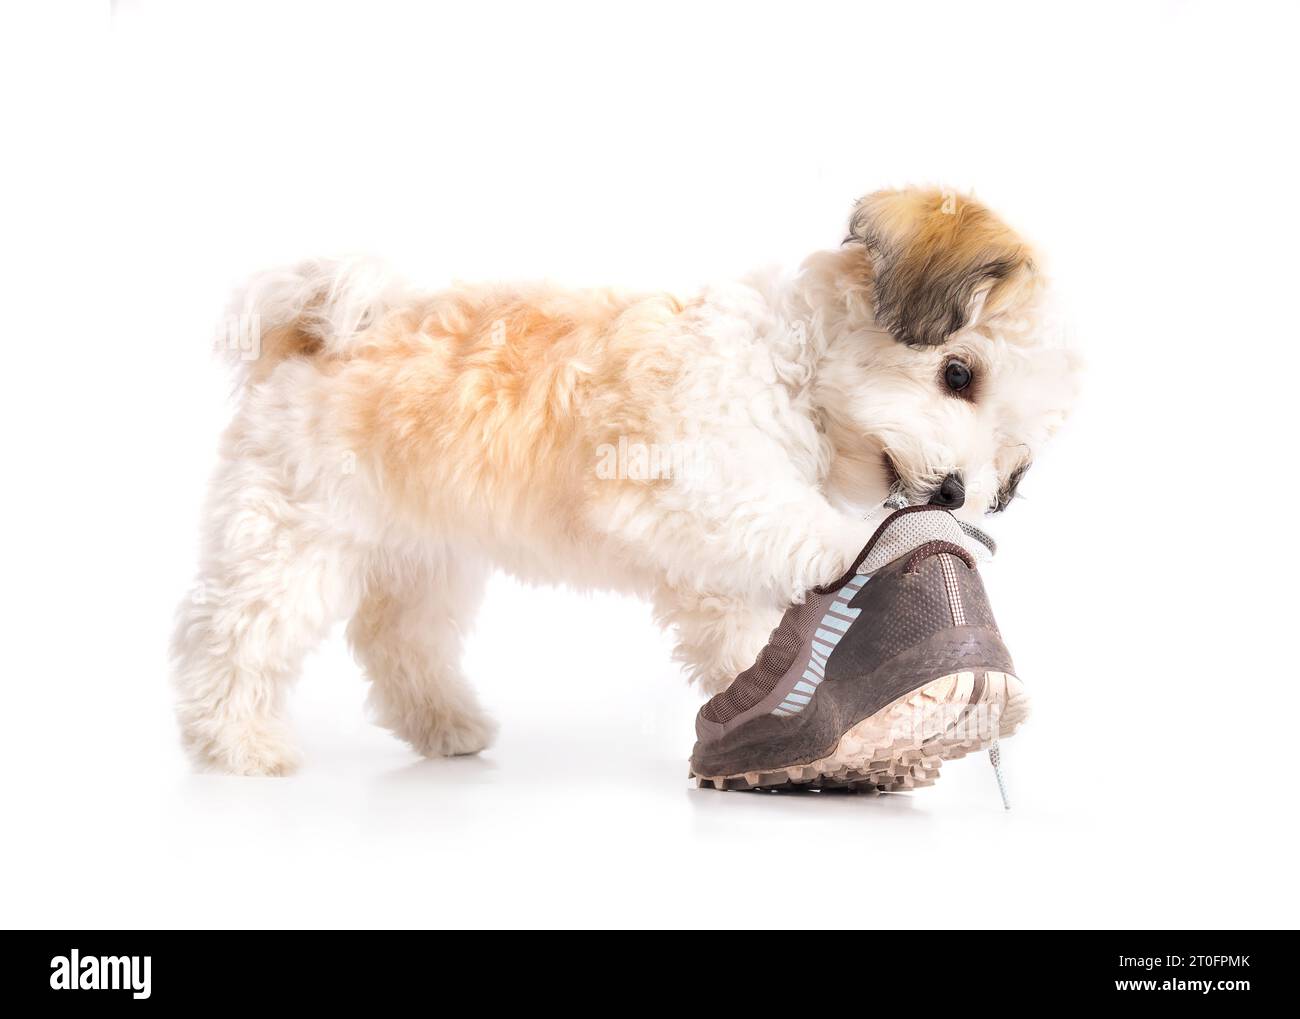 Small puppy with shoe and pulling on shoe lace. Cute fluffy puppy dog playing with a shoe. Bad habit or unwanted behavior. 16 weeks old female Havanes Stock Photo